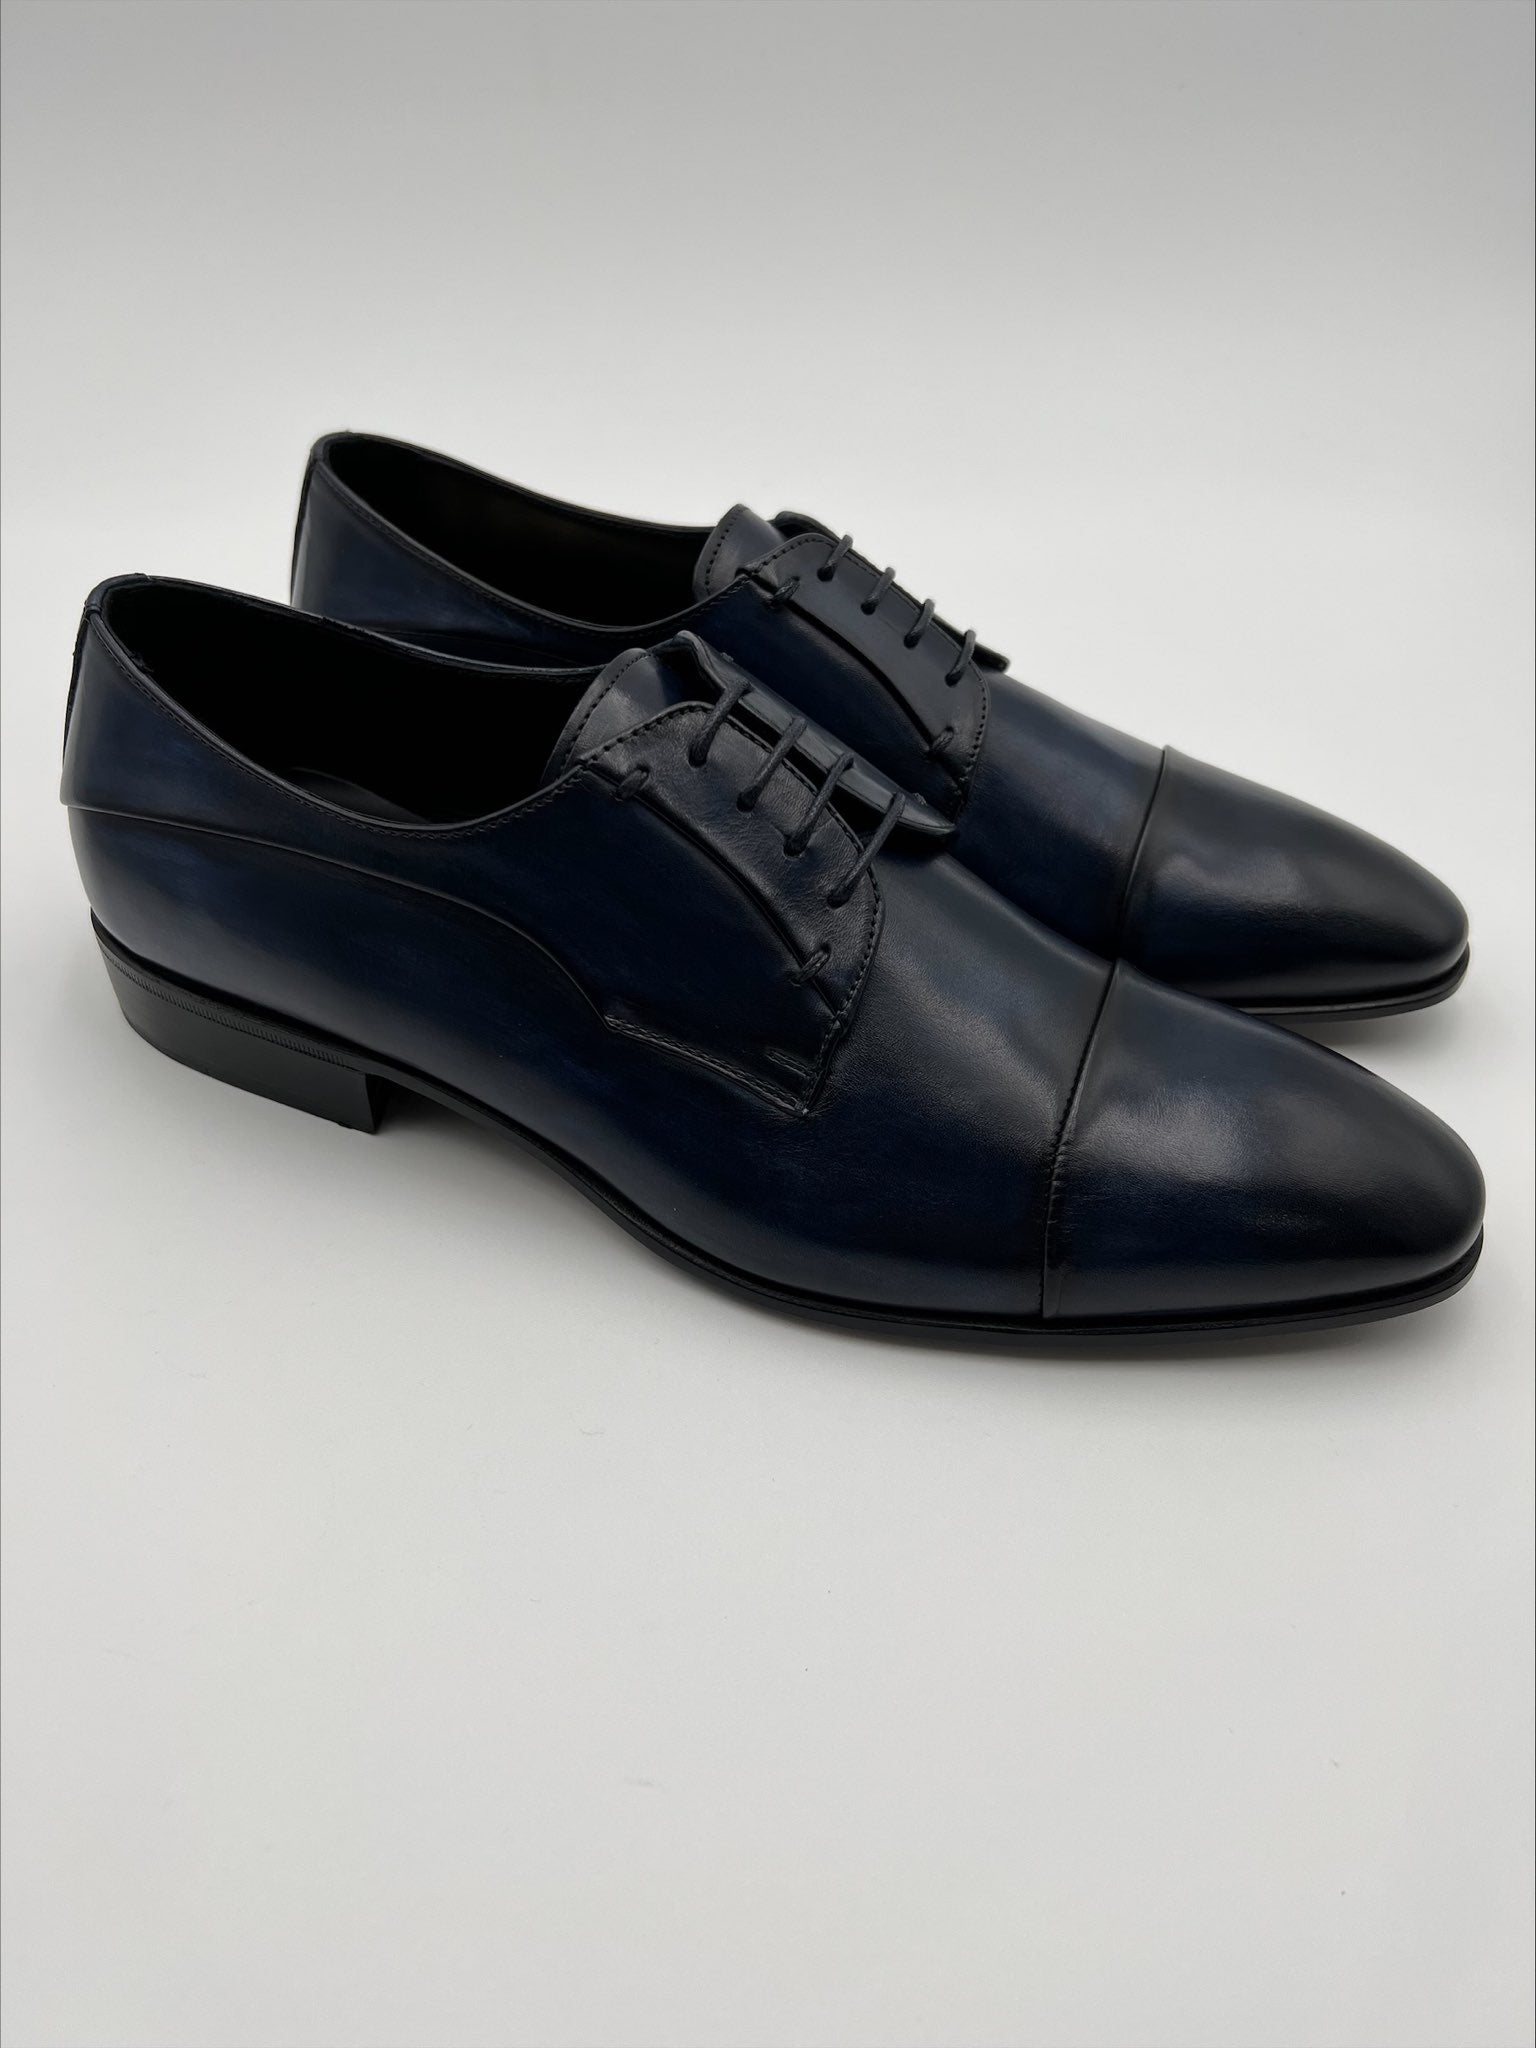 Classic Derby Shoe / Long Shape Blue Smart/casual style/High instep Flexible structure, suitable for wider feet / BLUE, HAND SHADED / leather crust colored and hand-aged  calfskin /  black calf lining / Elongated shape /  Lightweight leather bottom with anti-slip insert   sewn to BLAKE / Leather insole | Sartoria Dei Duchi - Atri